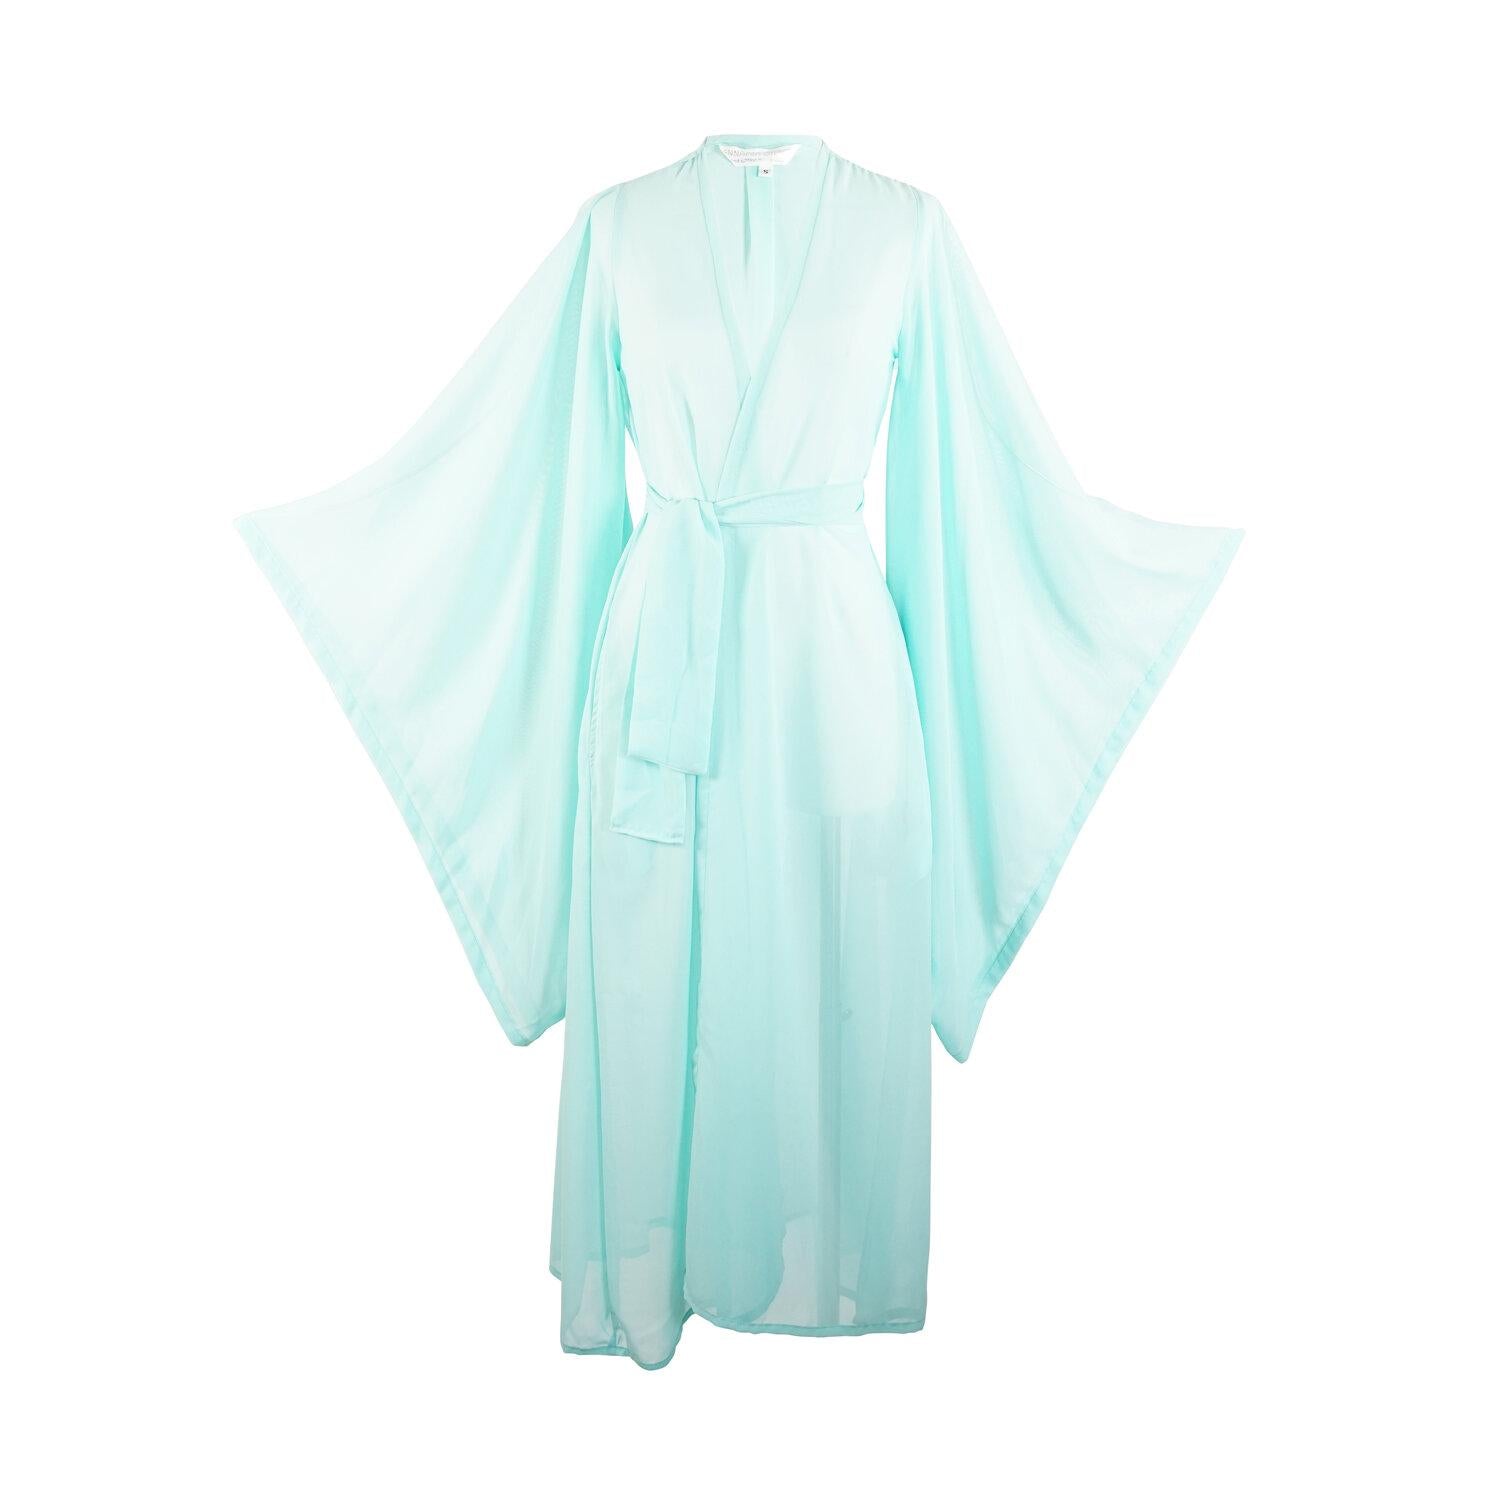 Jennafer Grace fashion kimono robe in a Tiffany teal blue. It has a wrap tie waist for a cinched look, v-neck, square sleeves, and an ankle length hem. Classic, bohemian aesthetic.